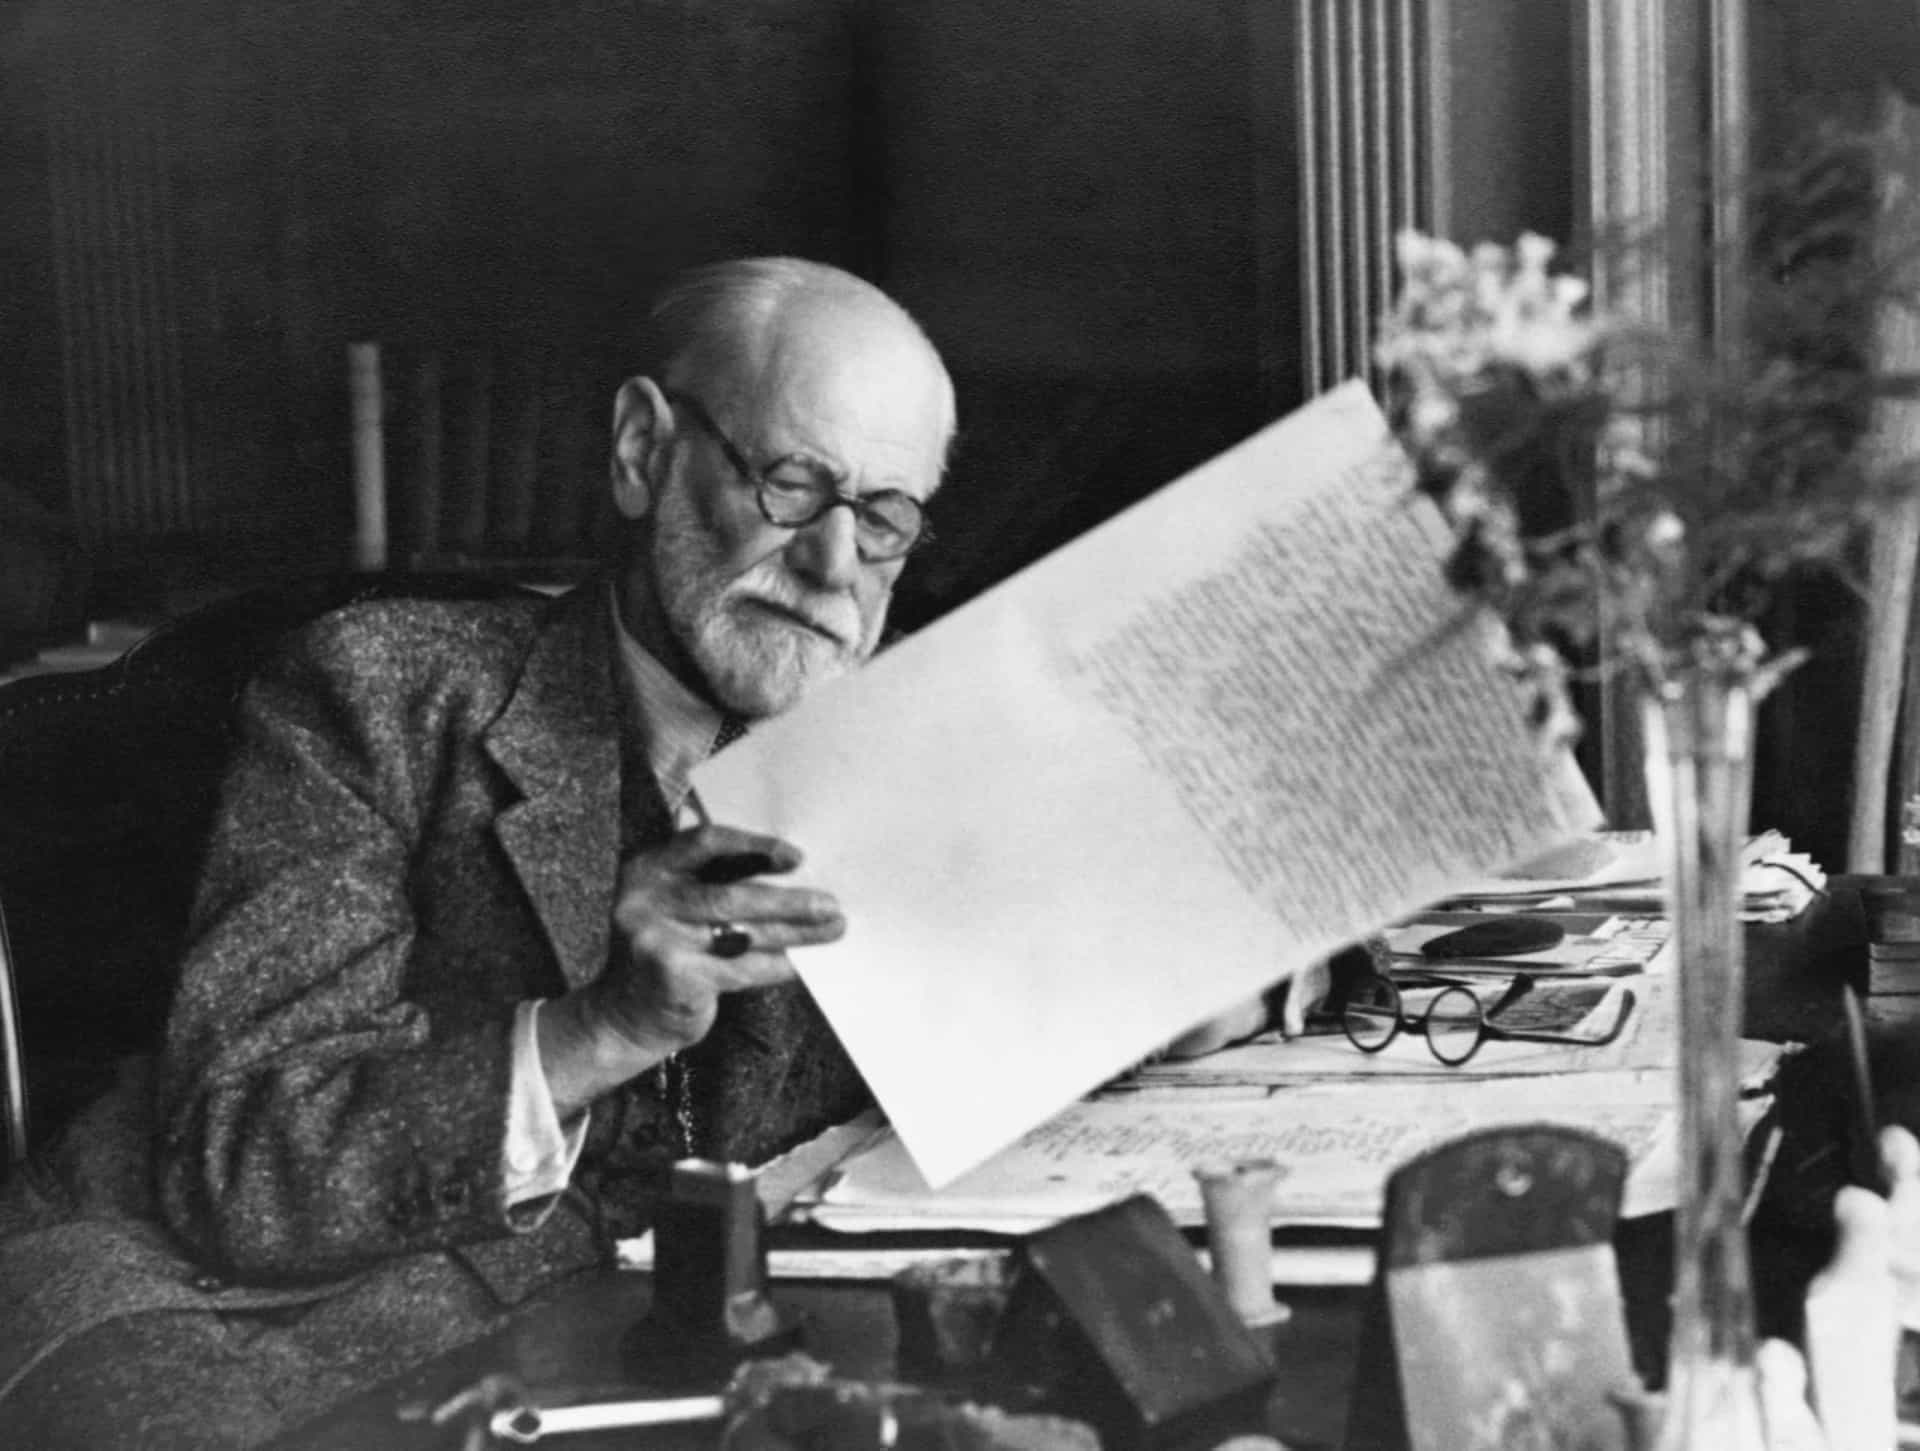 <p>Sigmund Freud is perhaps the best-known psychologist in the world. His work was revolutionary and he was one of the greatest minds of the 20th century, but his theories came with a great deal of controversy. During his life he was fighting an uphill battle against archaic attitudes towards <a href="https://www.starsinsider.com/lifestyle/439645/the-stanford-prison-experiment-and-its-relevance-today" rel="noopener">psychology</a>. Nowadays, his theories on women and sexual development are widely discredited. He has often been <a href="https://www.verywellmind.com/sigmund-freud-his-life-work-and-theories-2795860" rel="noopener">called</a> "history's most debunked doctor."</p><p>Regardless of his flaws, he was responsible for the creation of an entire school of thought which still influences modern psychology today. Click through the gallery to learn about the life and work of the founding father of psychoanalysis. </p>